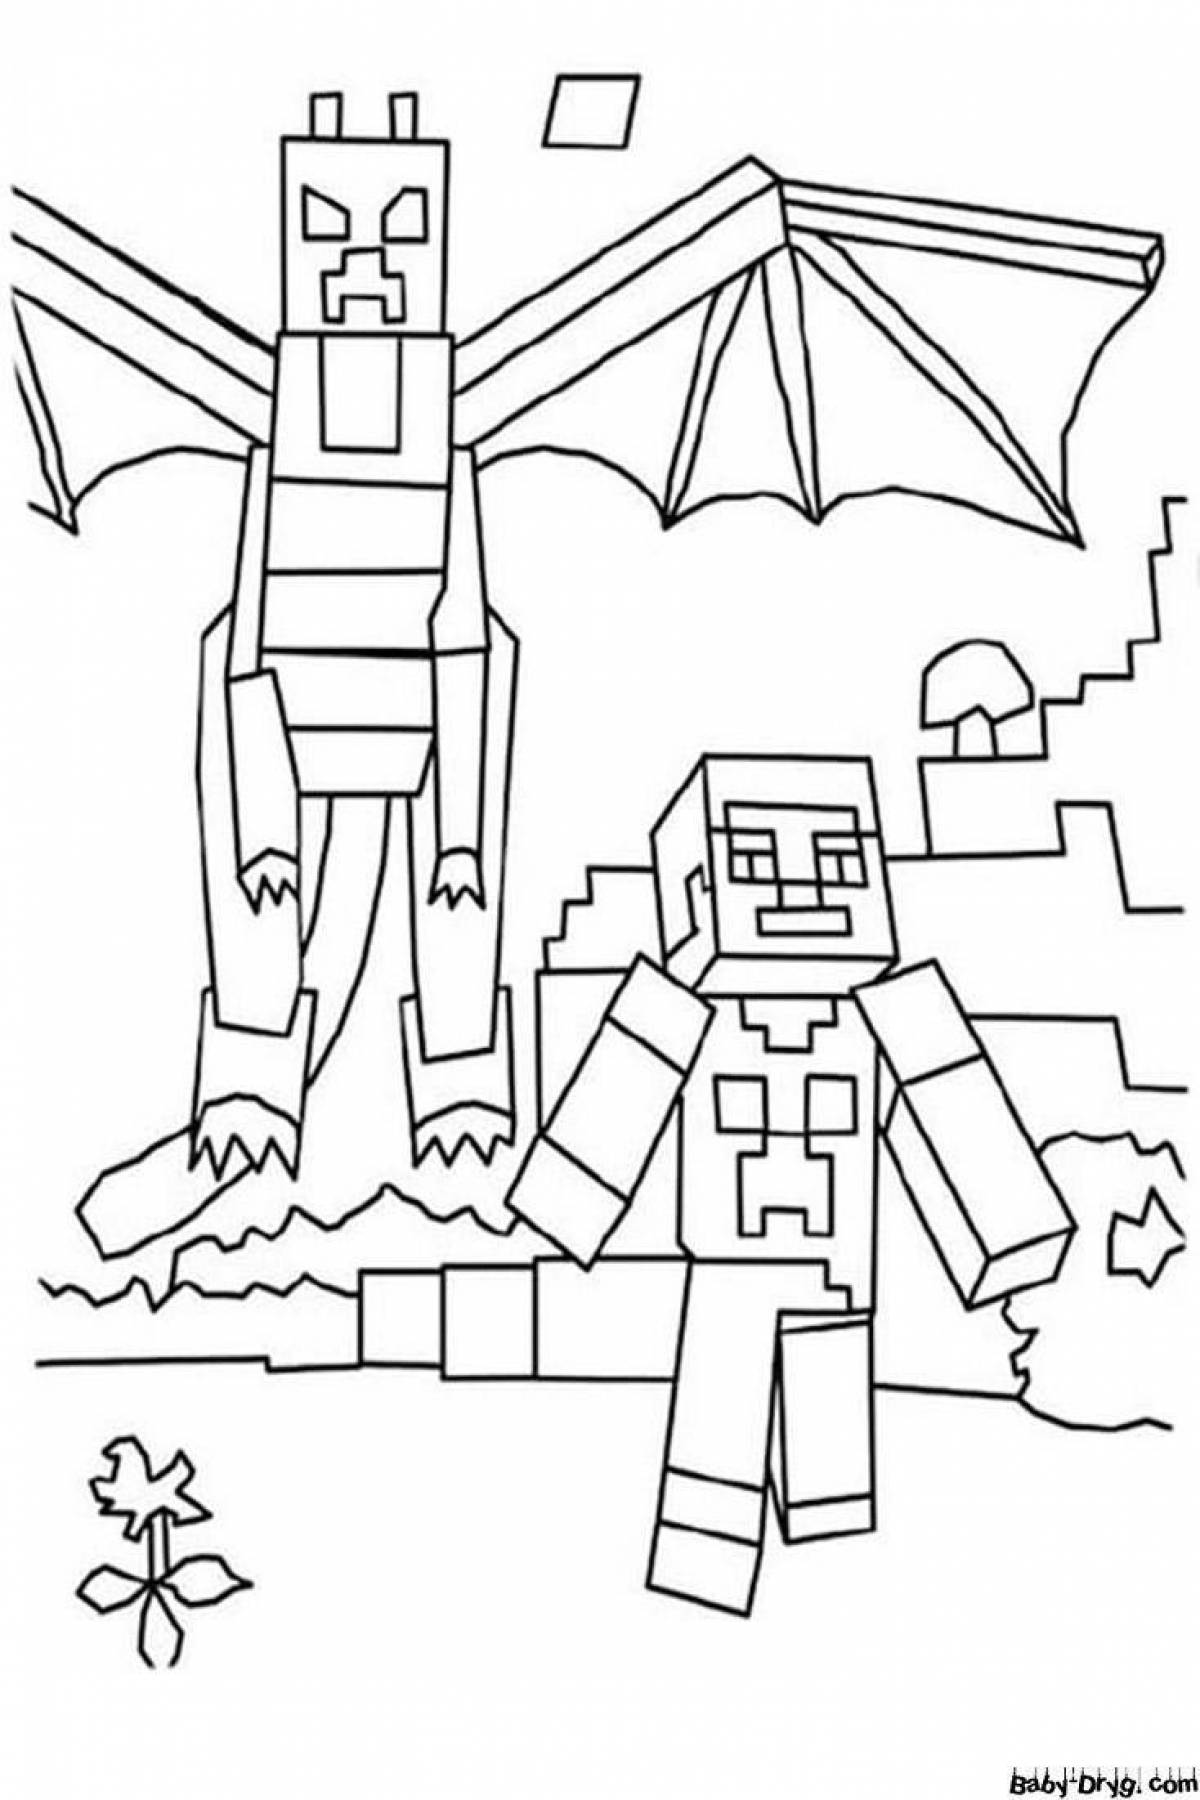 Cool minecraft coloring for boys